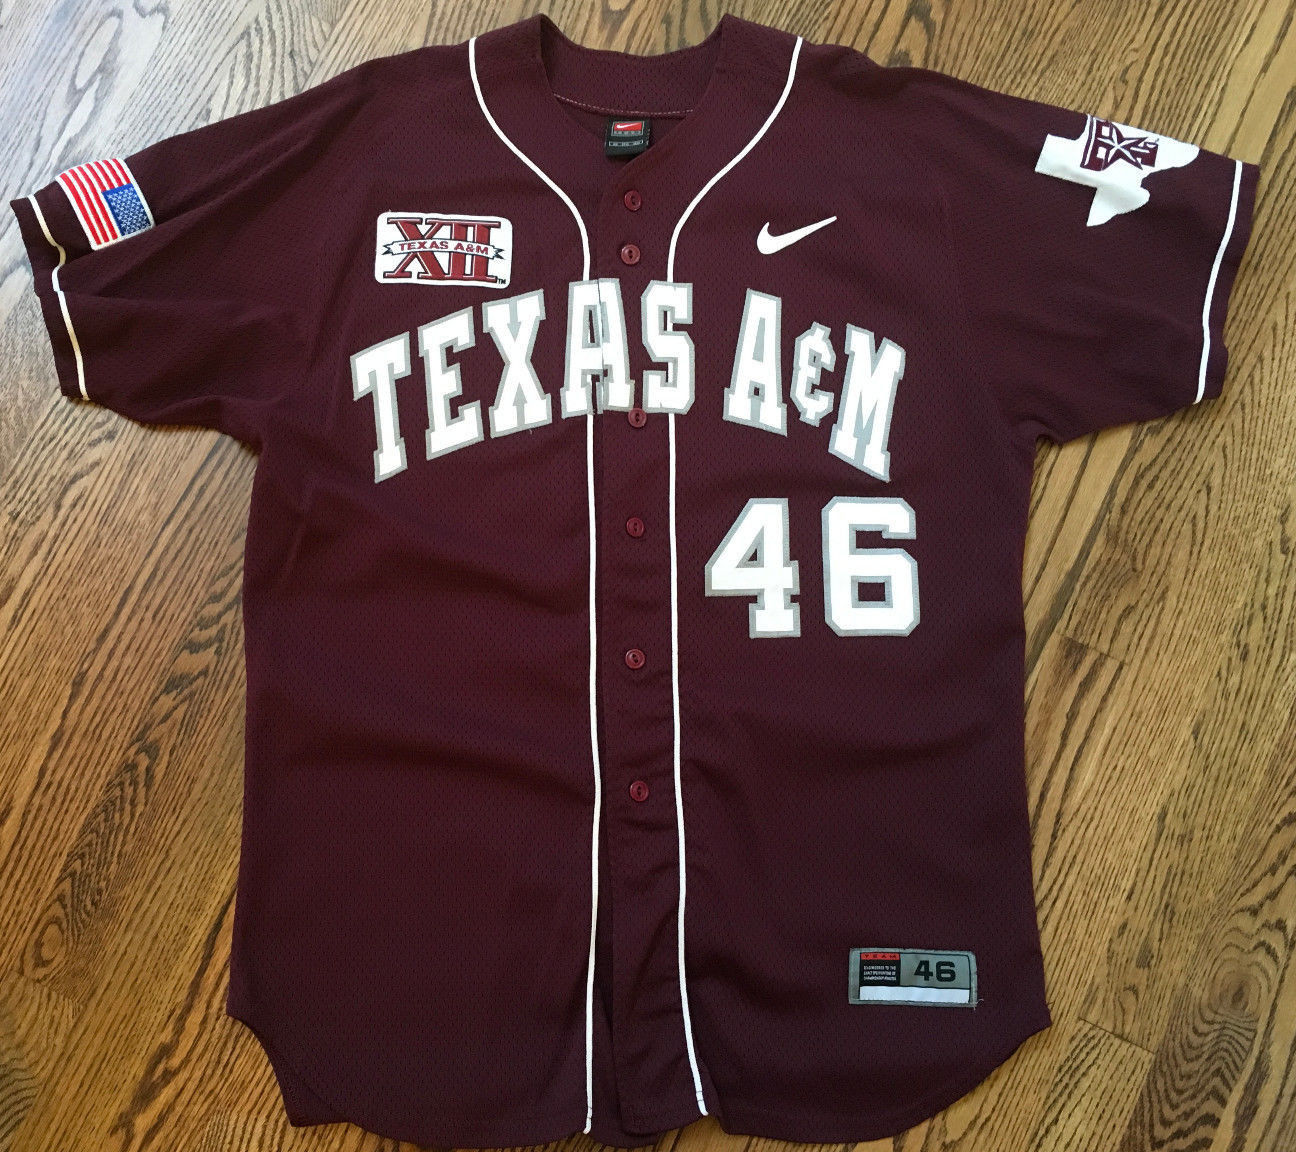 Texas A&M Aggies Nike Authentic Maroon Baseball Game Used / Issued Jersey Rare!